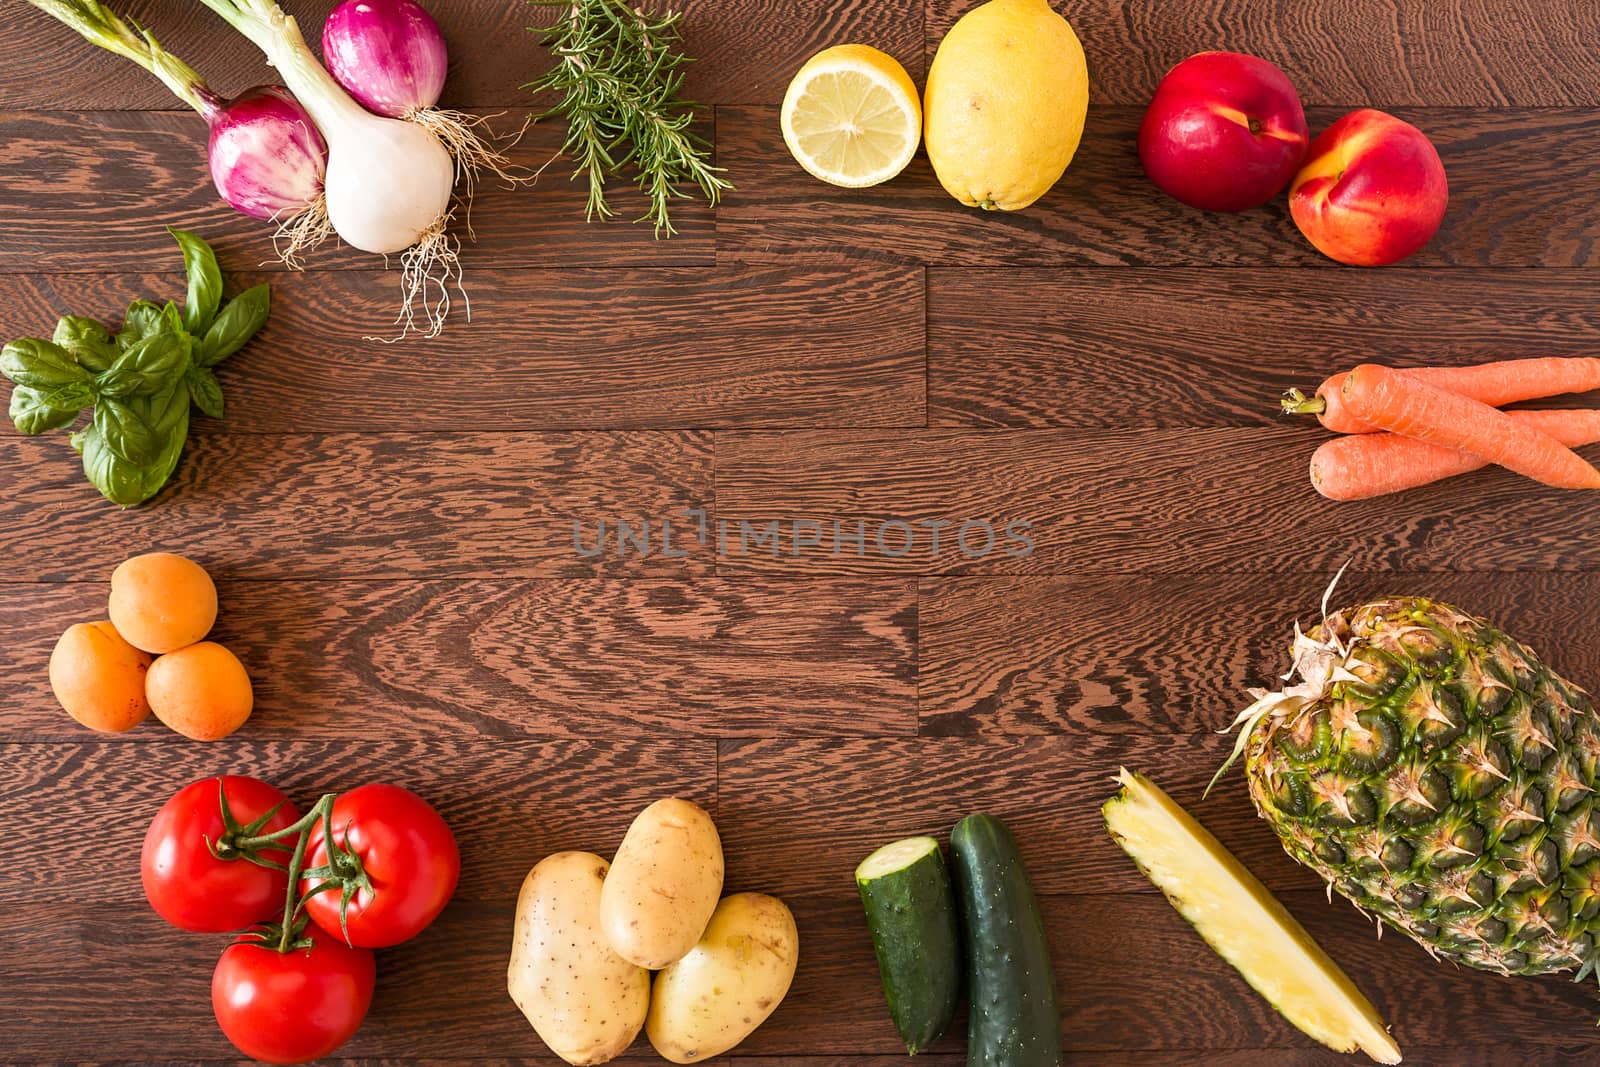 Assorted raw vegetables and fruits over a wooden background